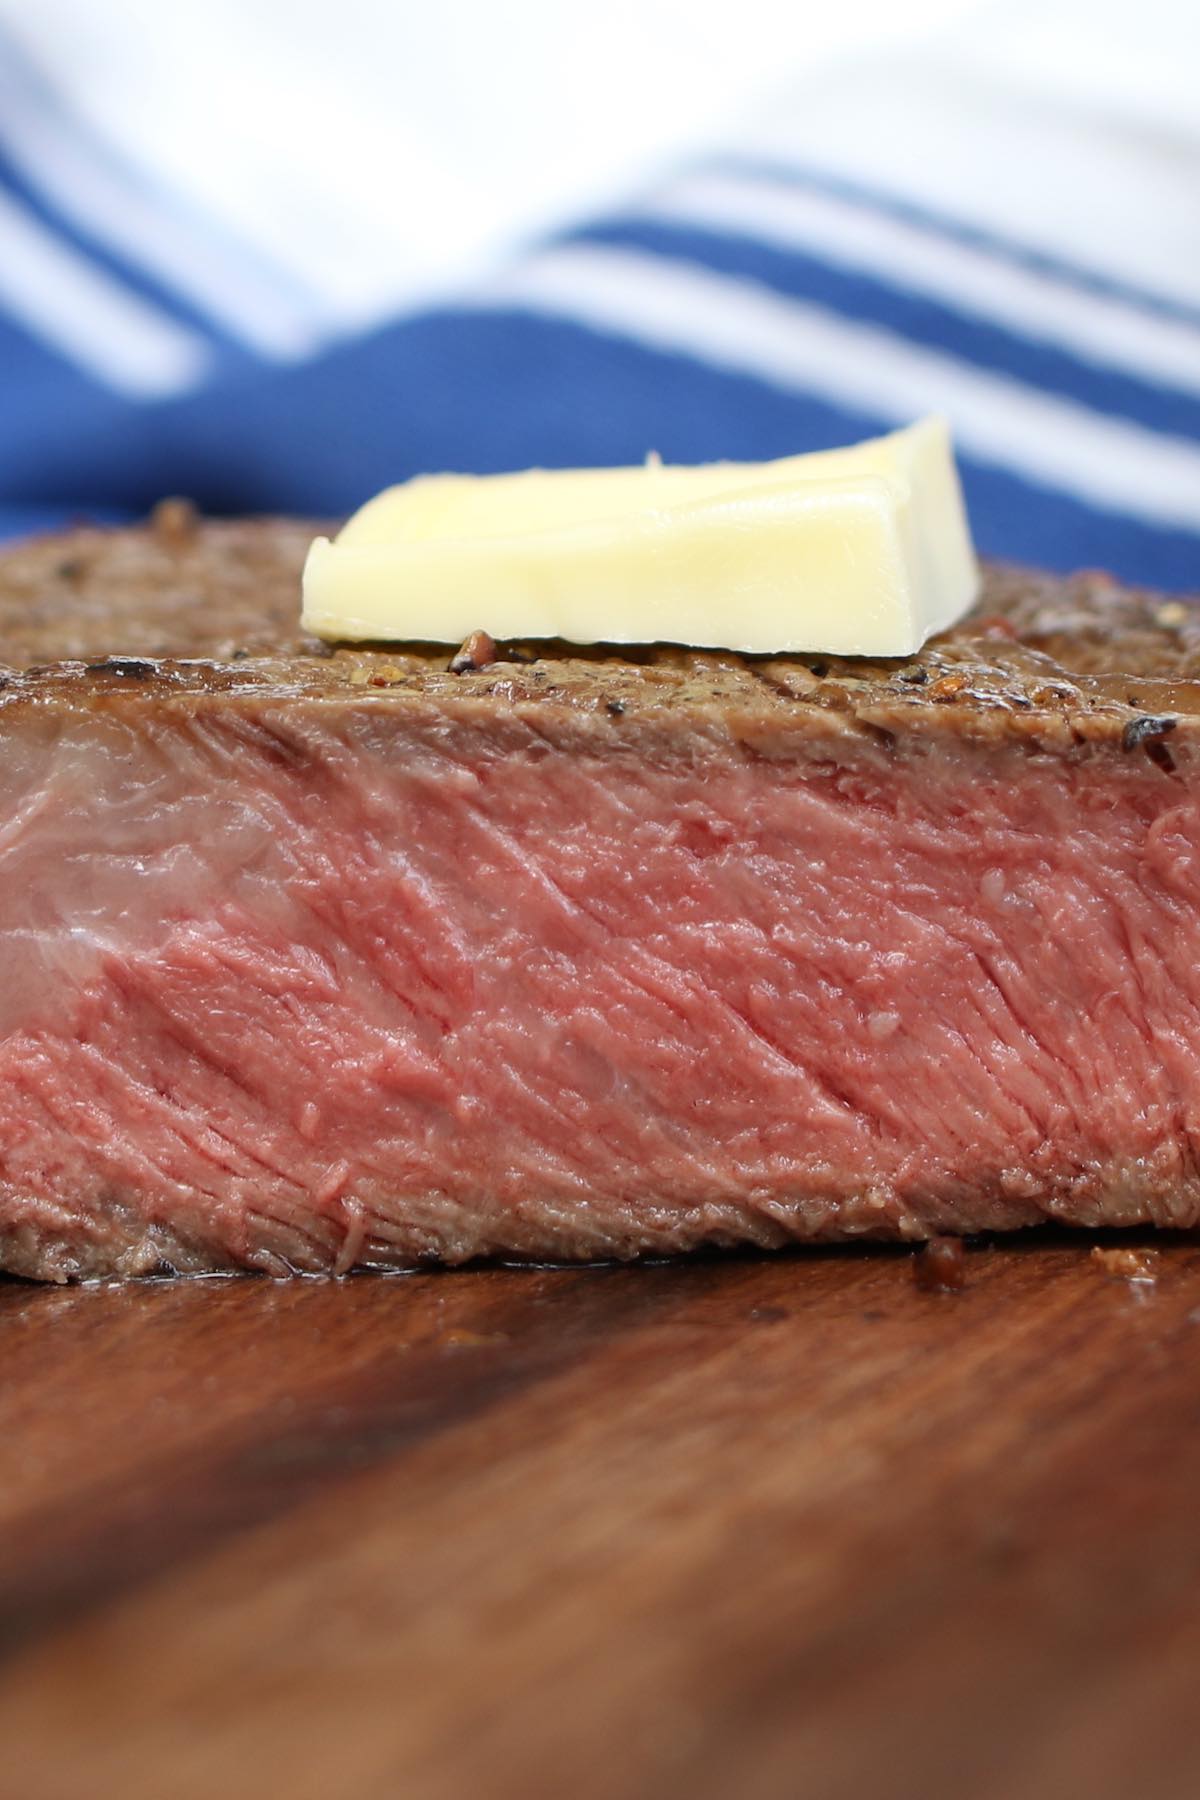 From porterhouse to flank steak, below is a complete guide on what you need to know about the most common types of steak and how to cook each cut of meat properly.